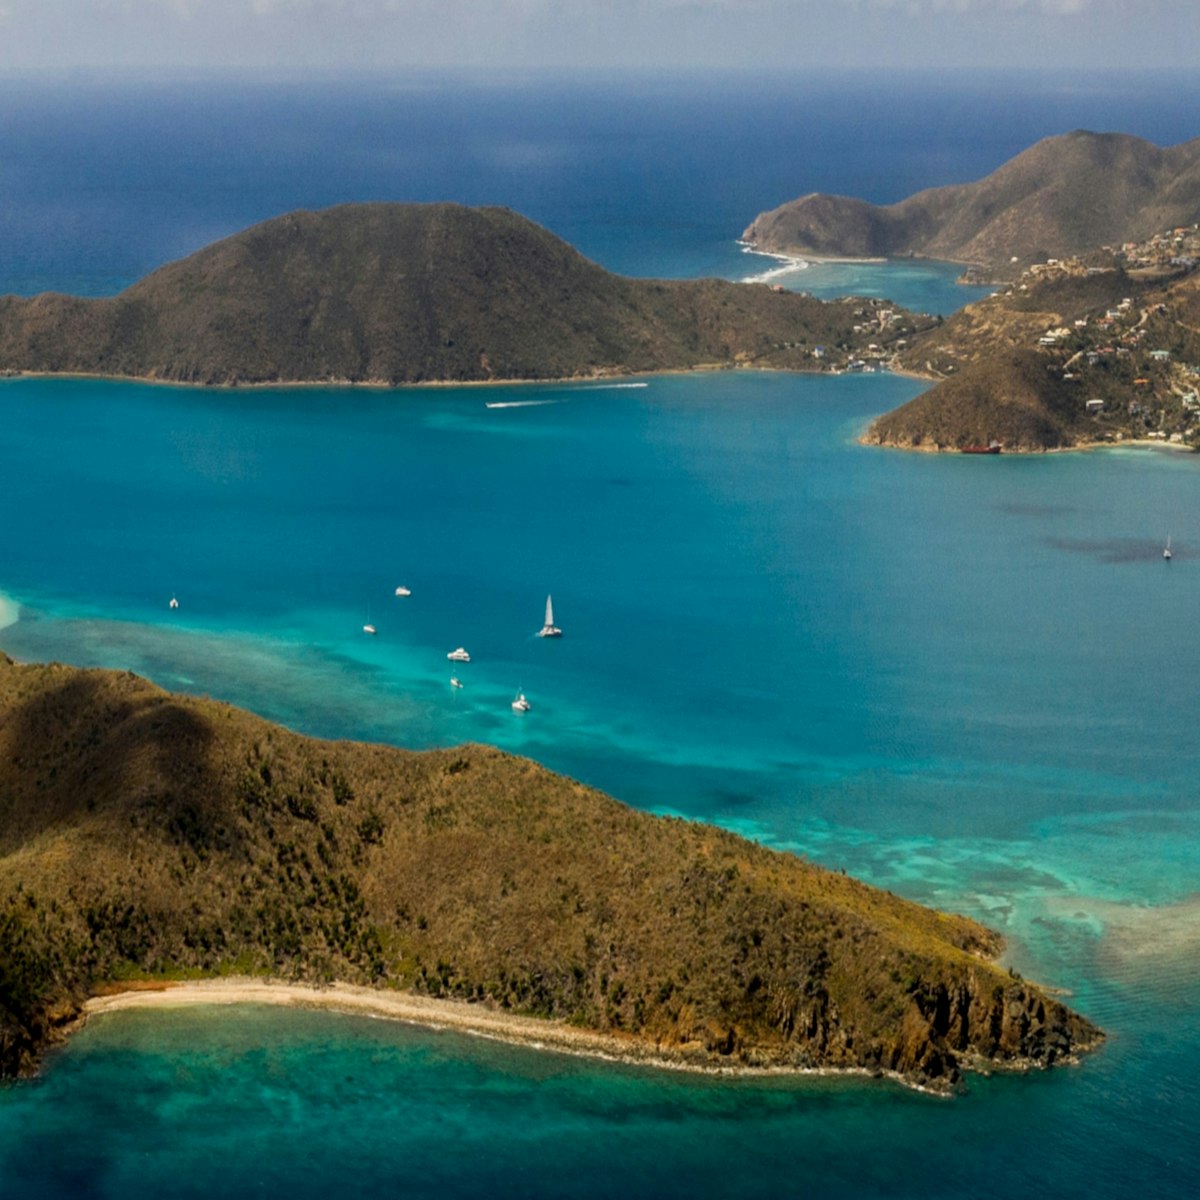 We've compiled everything you need to know before sailing to this amazing destination.